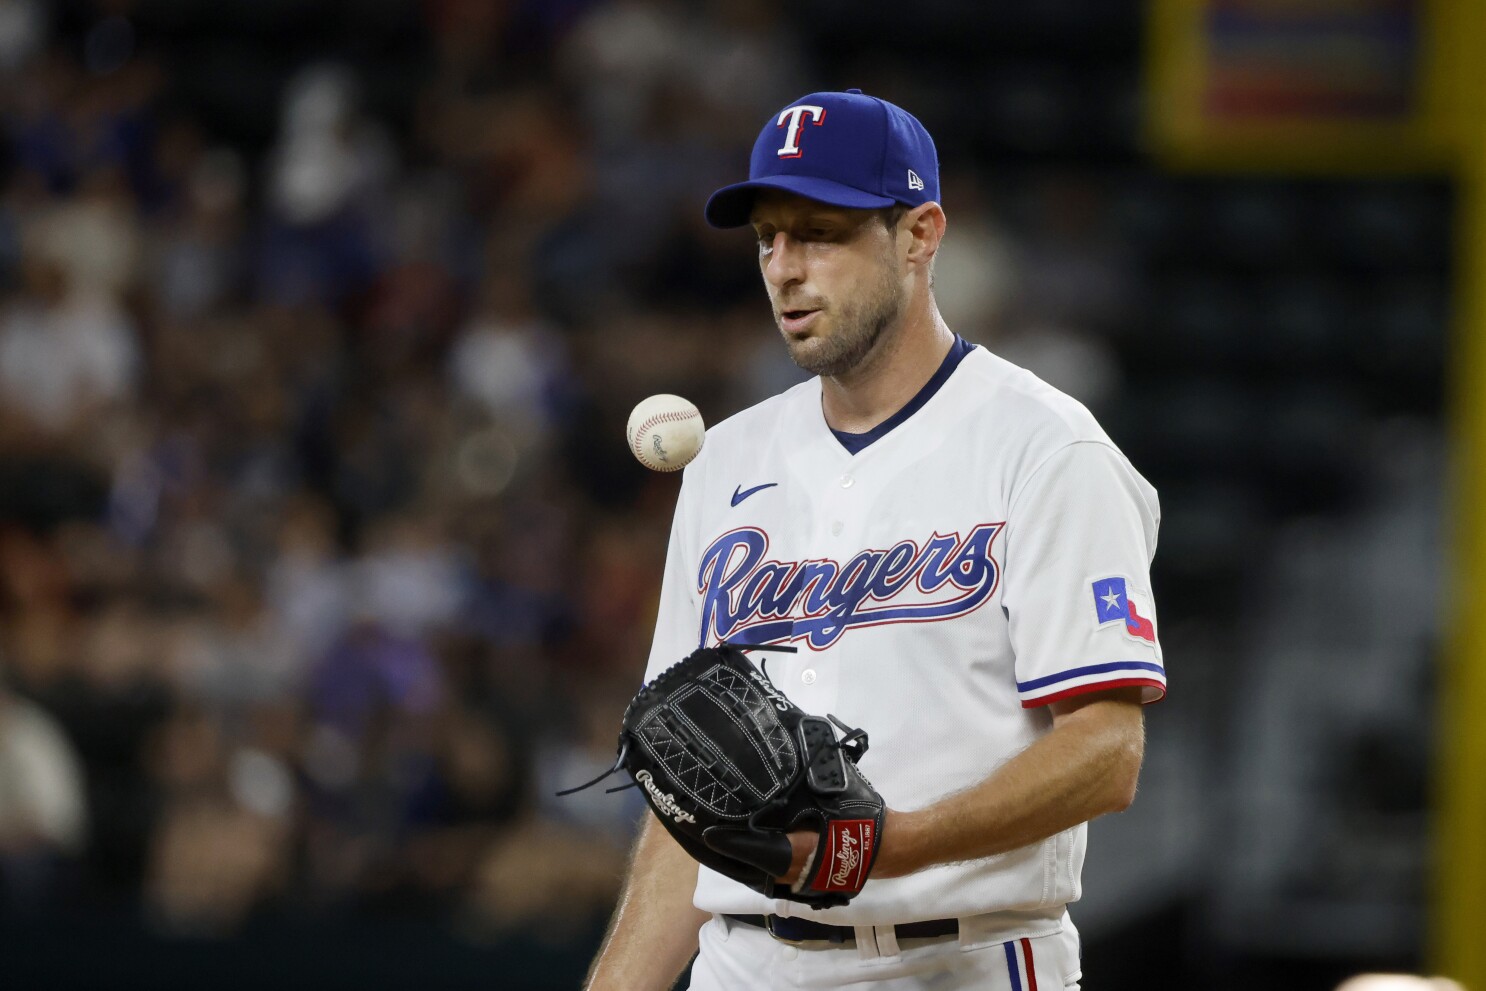 Max Scherzer strikes out 9 over 6 innings in his Rangers debut | AP News